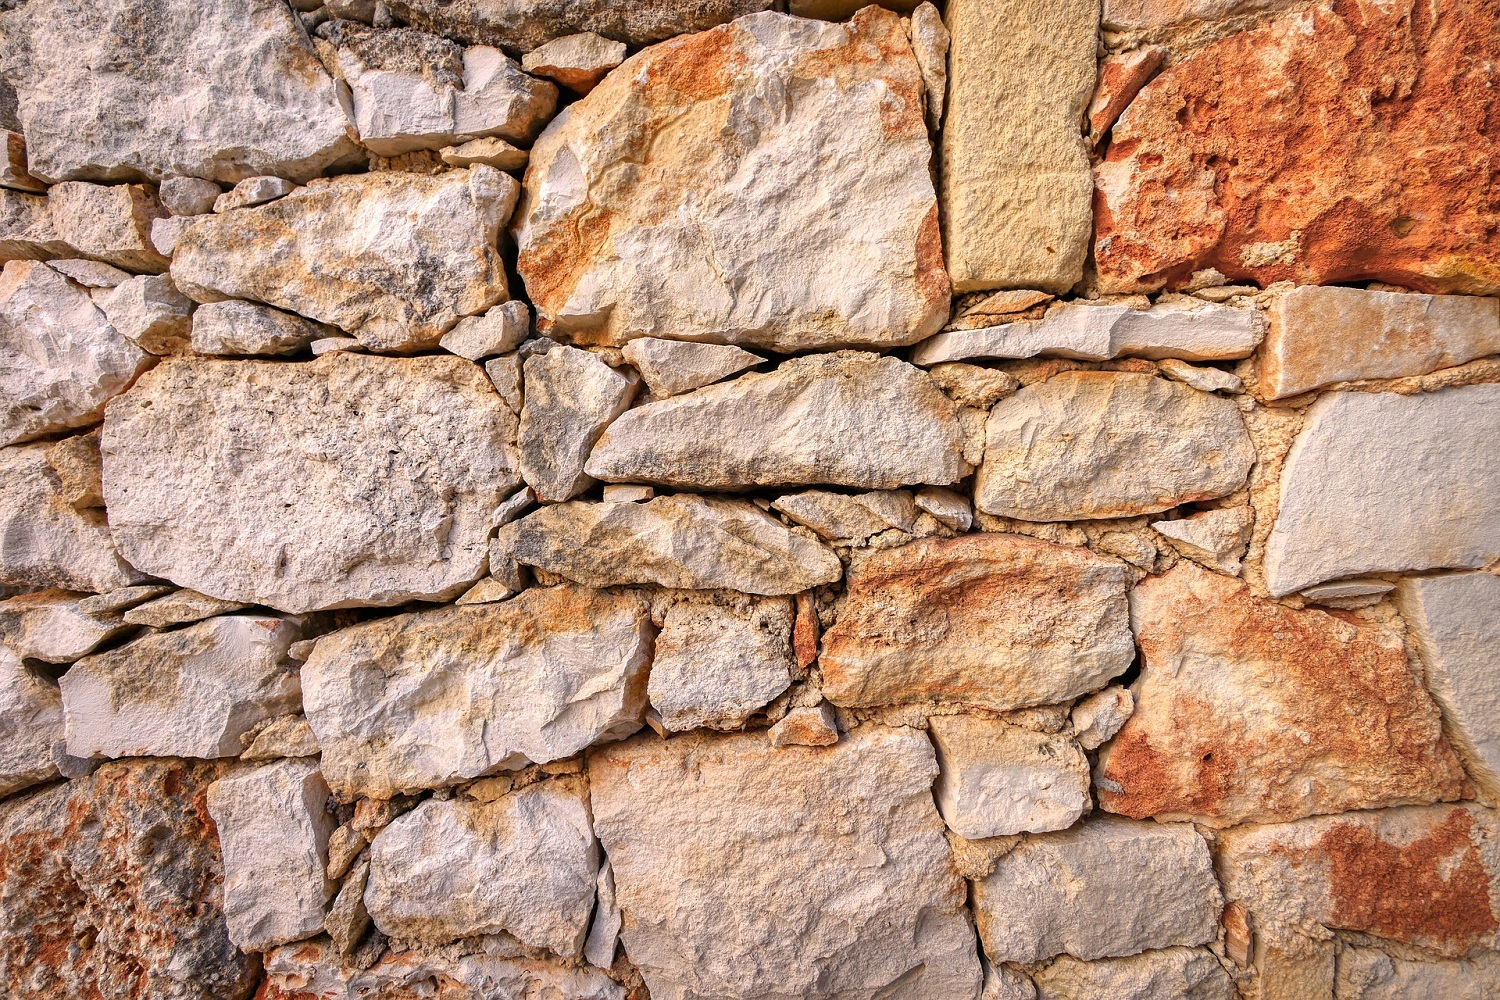 Photo of natural stone wall structure with stones made of random size and texture